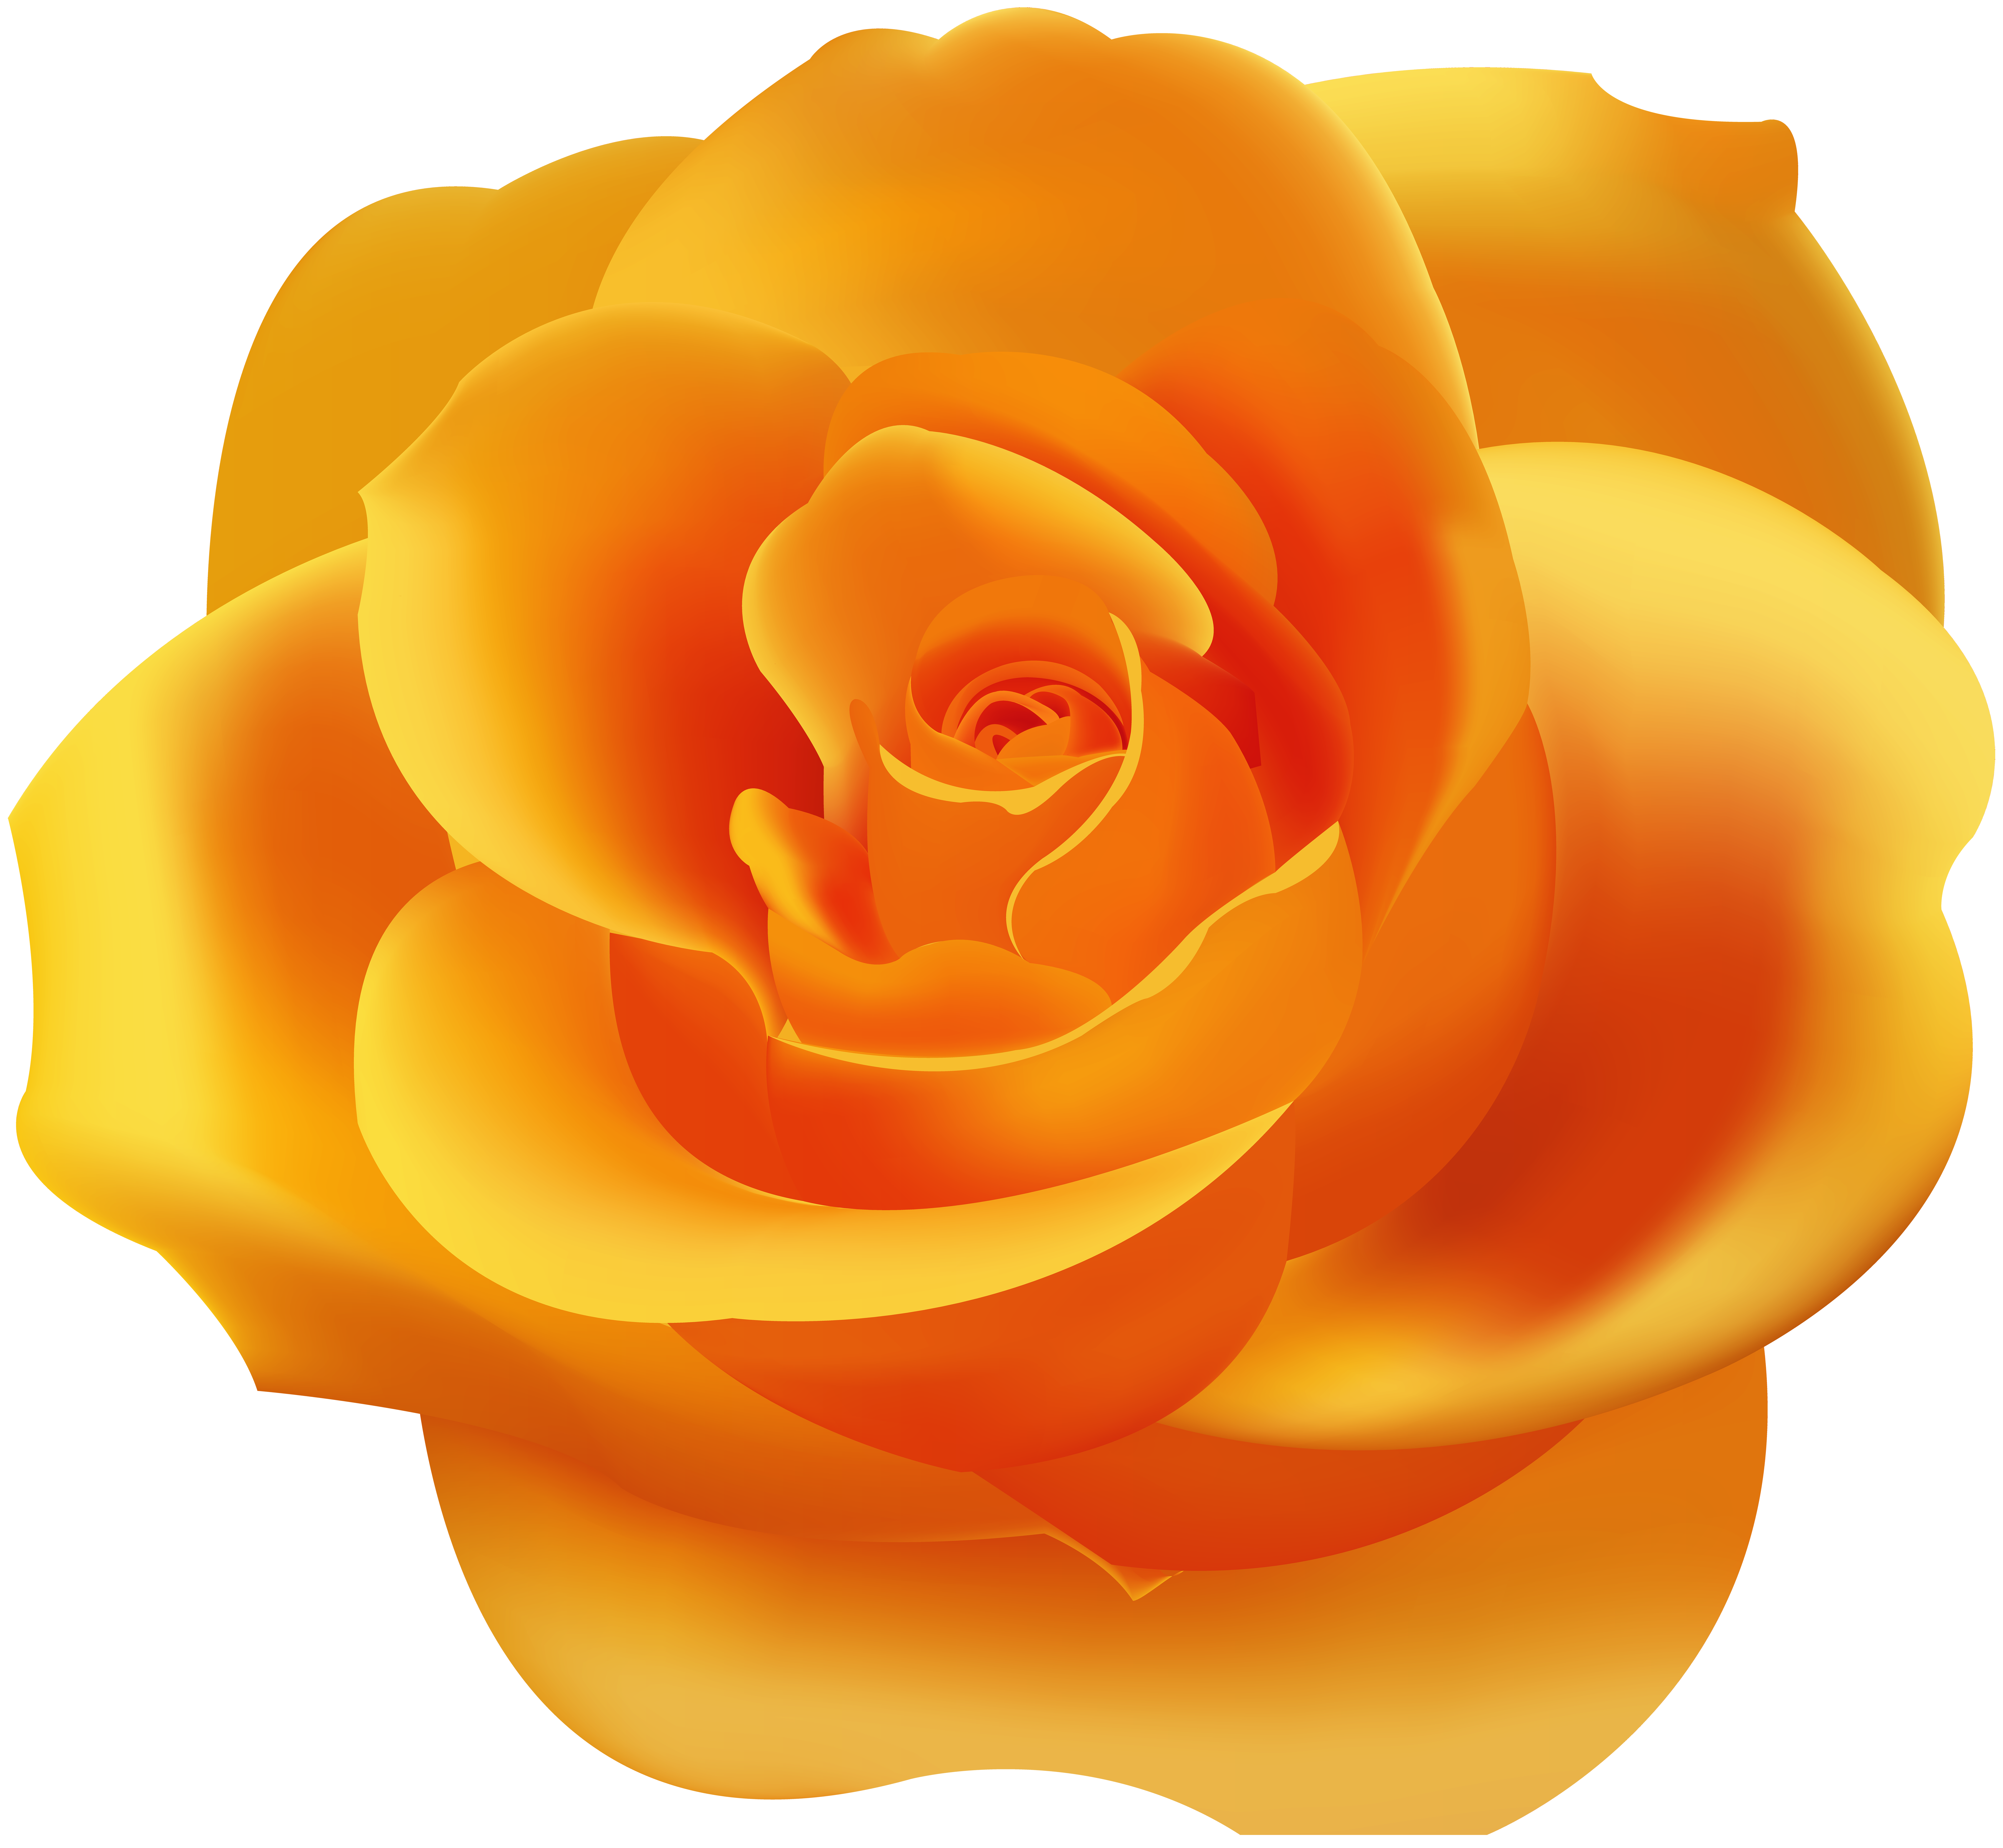 Orange Rose PNG Clip Art | Gallery Yopriceville - High-Quality ...